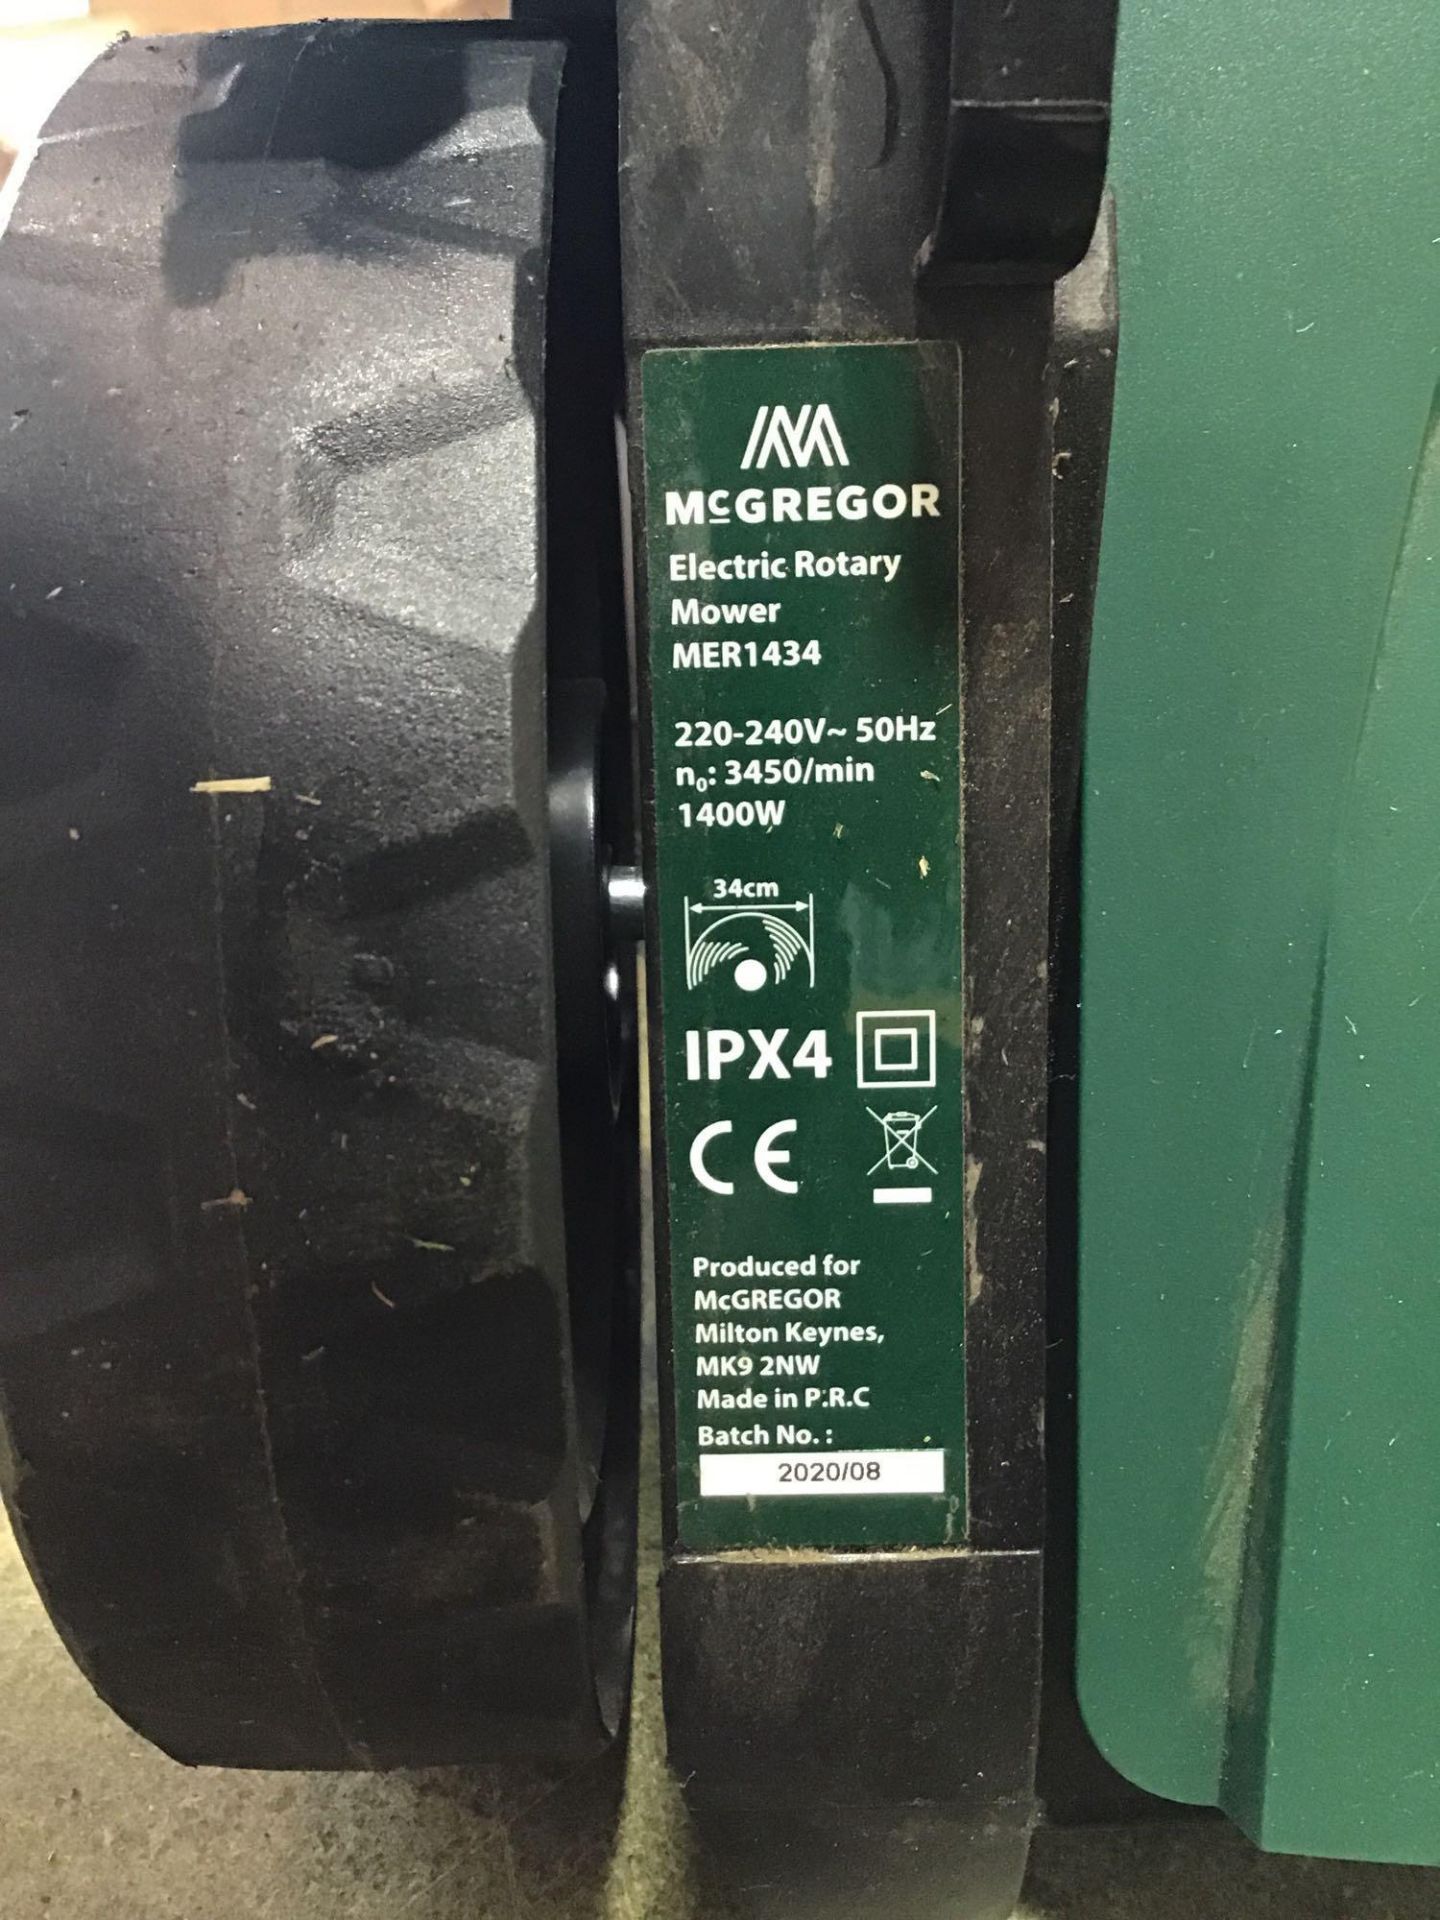 McGregor 34cm Corded Rotary Lawnmower - 1400W - £80.00 RRP - Image 2 of 5